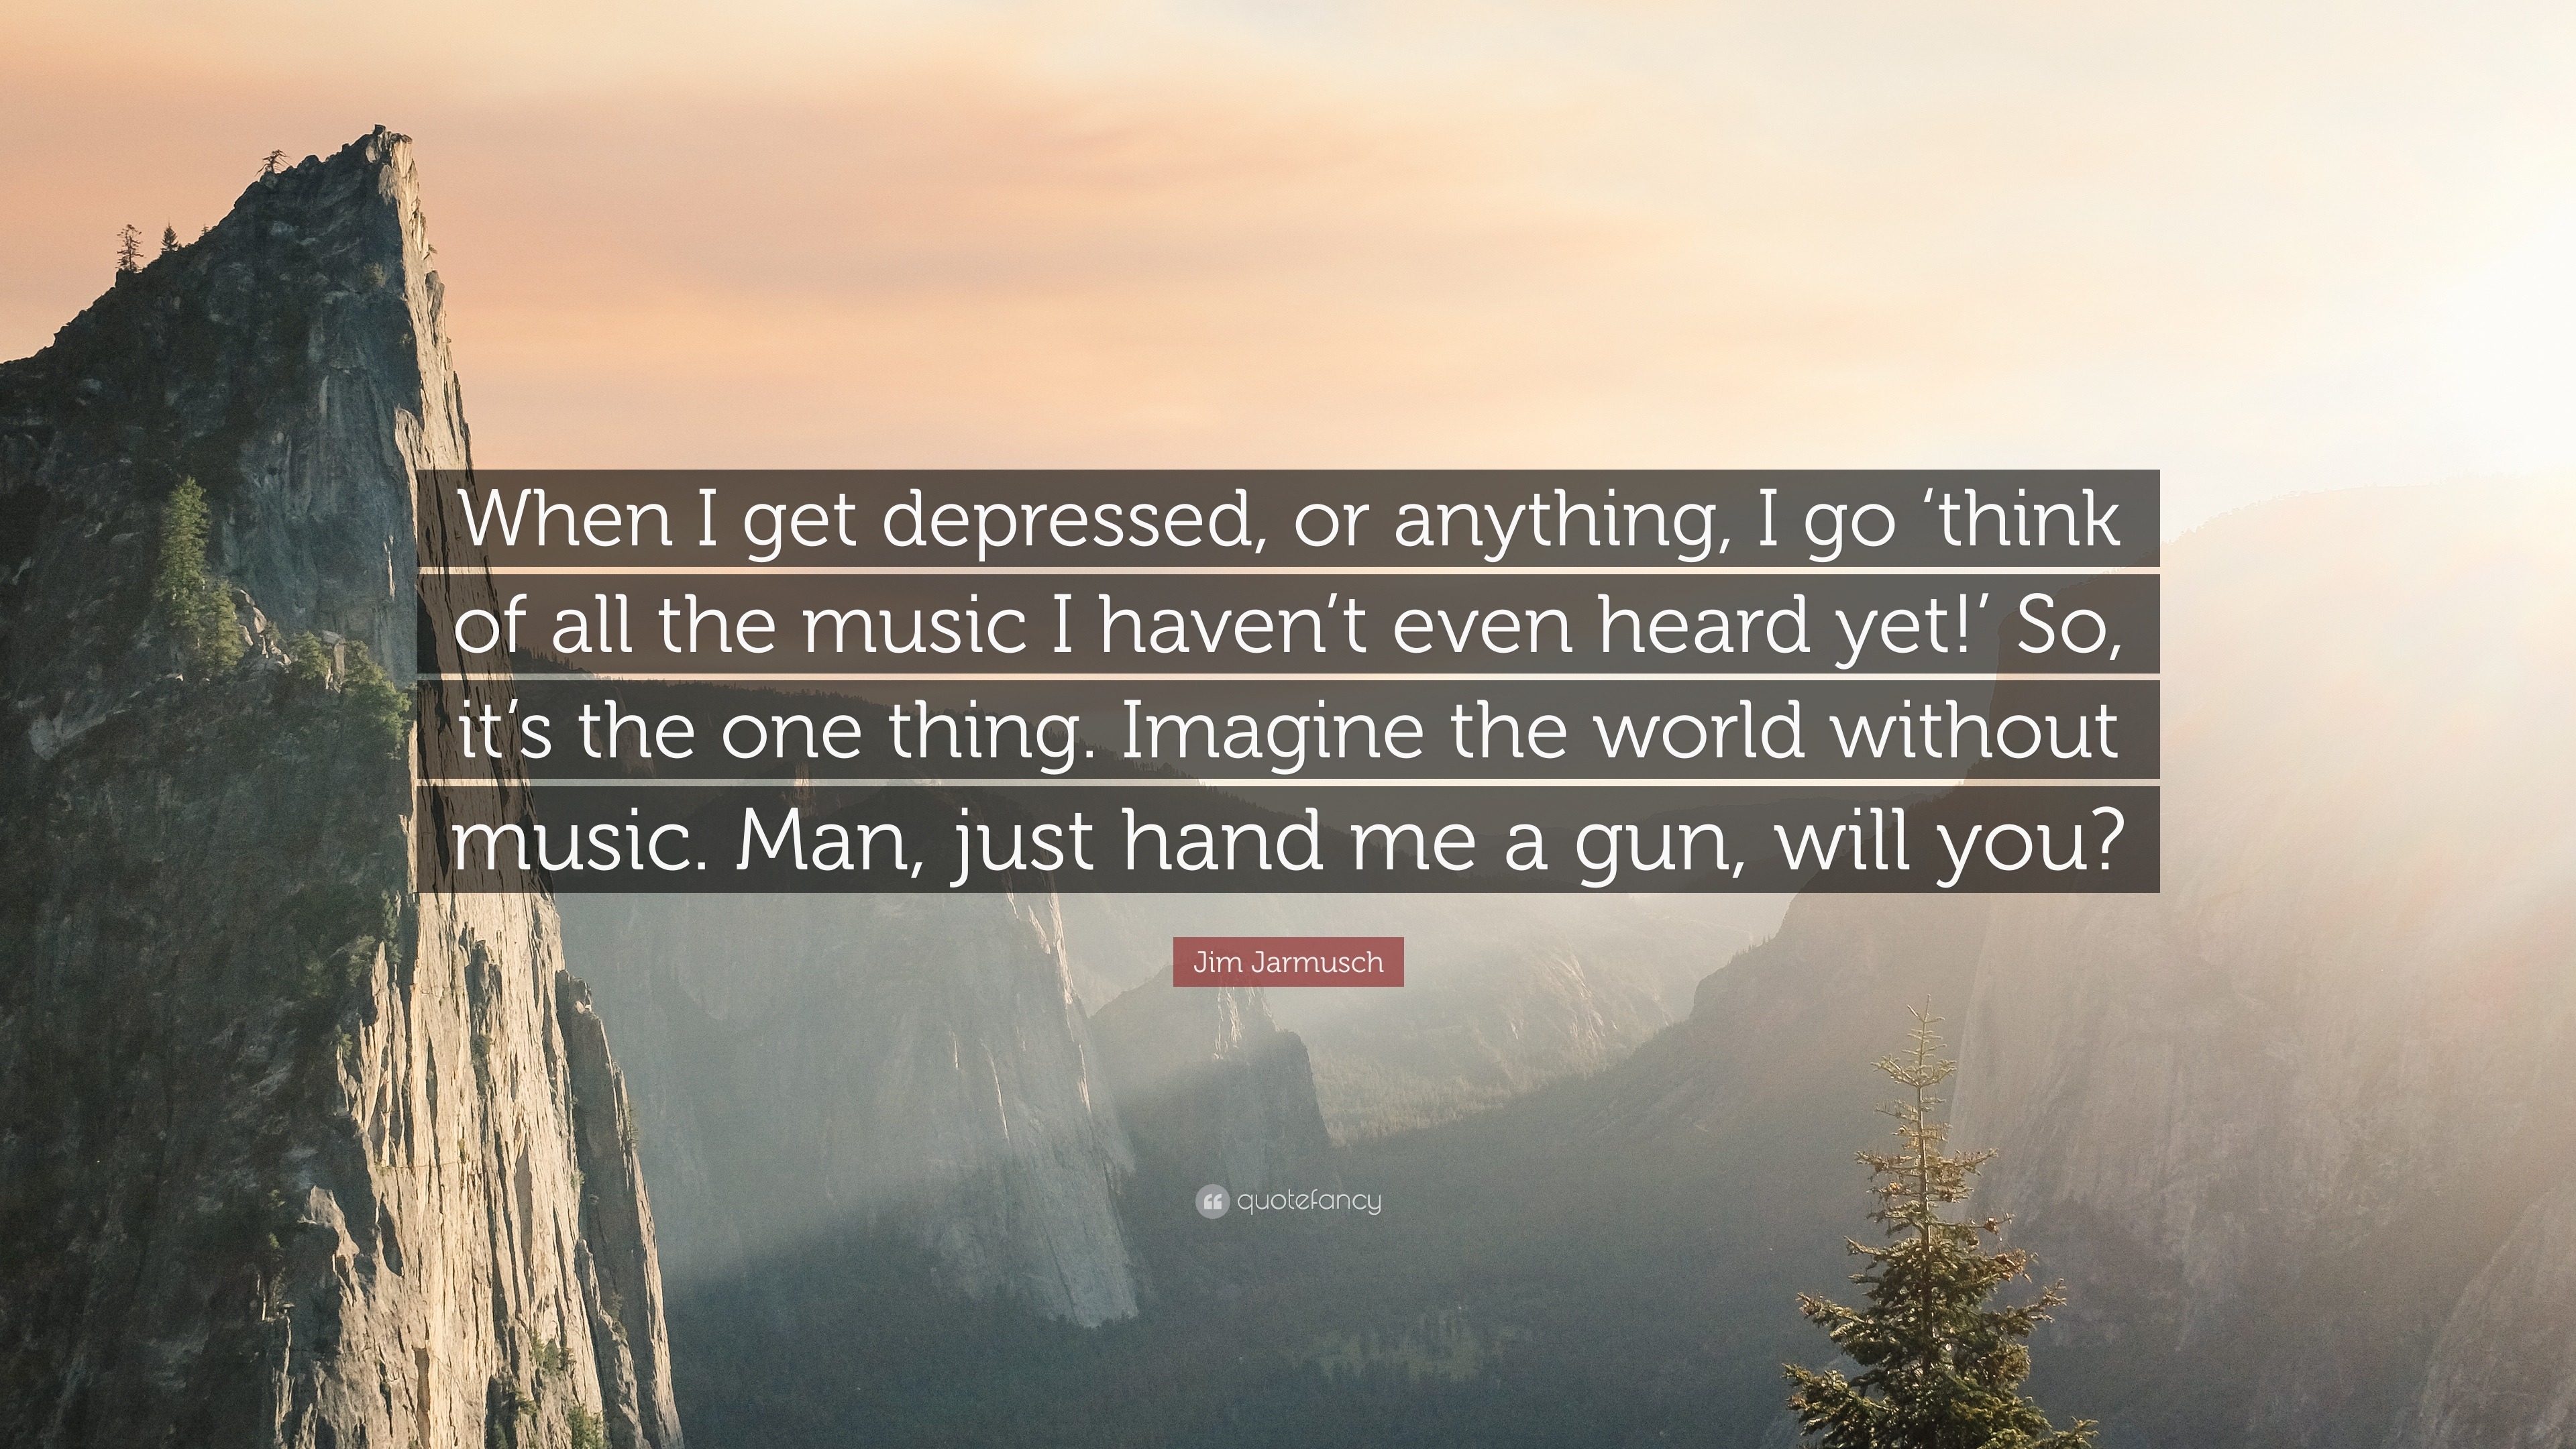 imagine a world without music